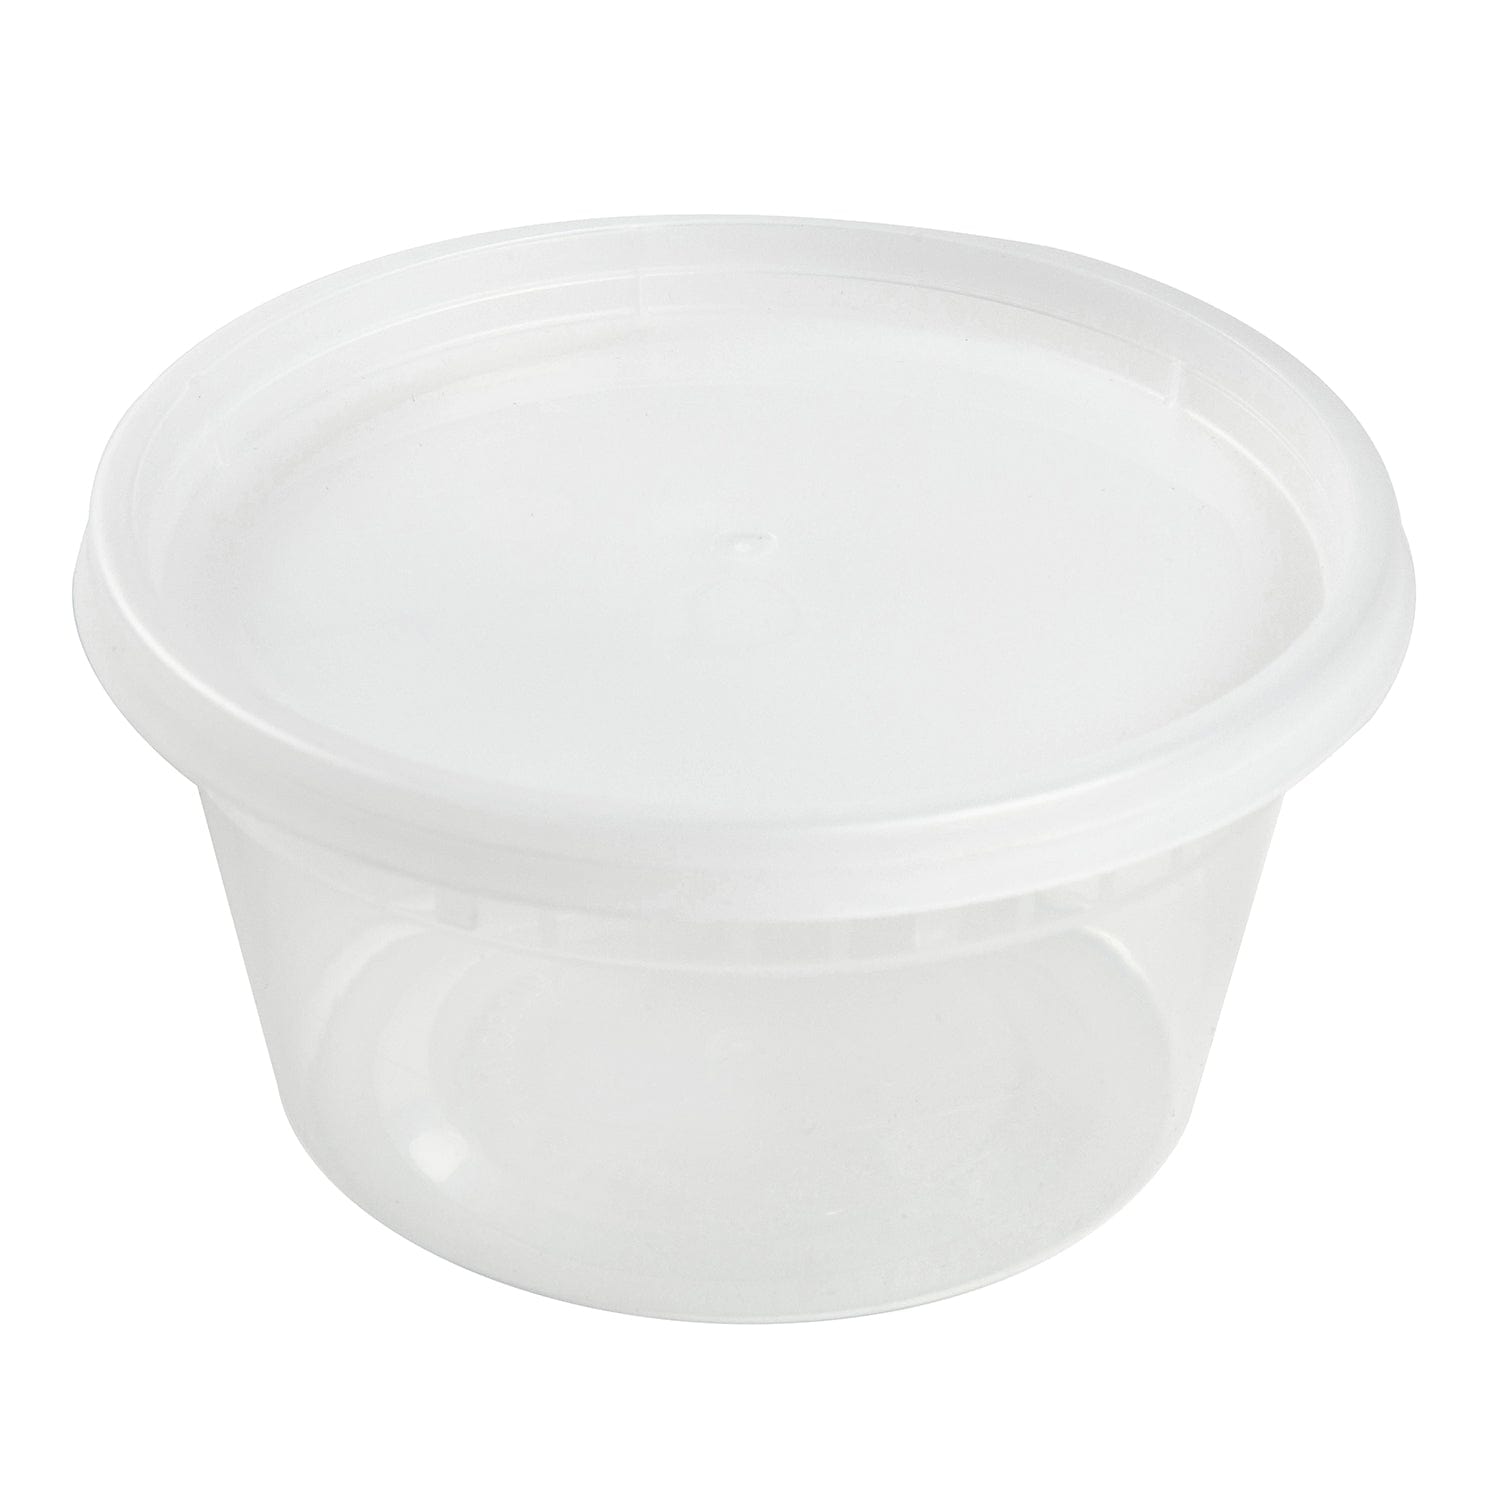 Pro Western 2.5 gallon White Container (40) (lids sold separately)